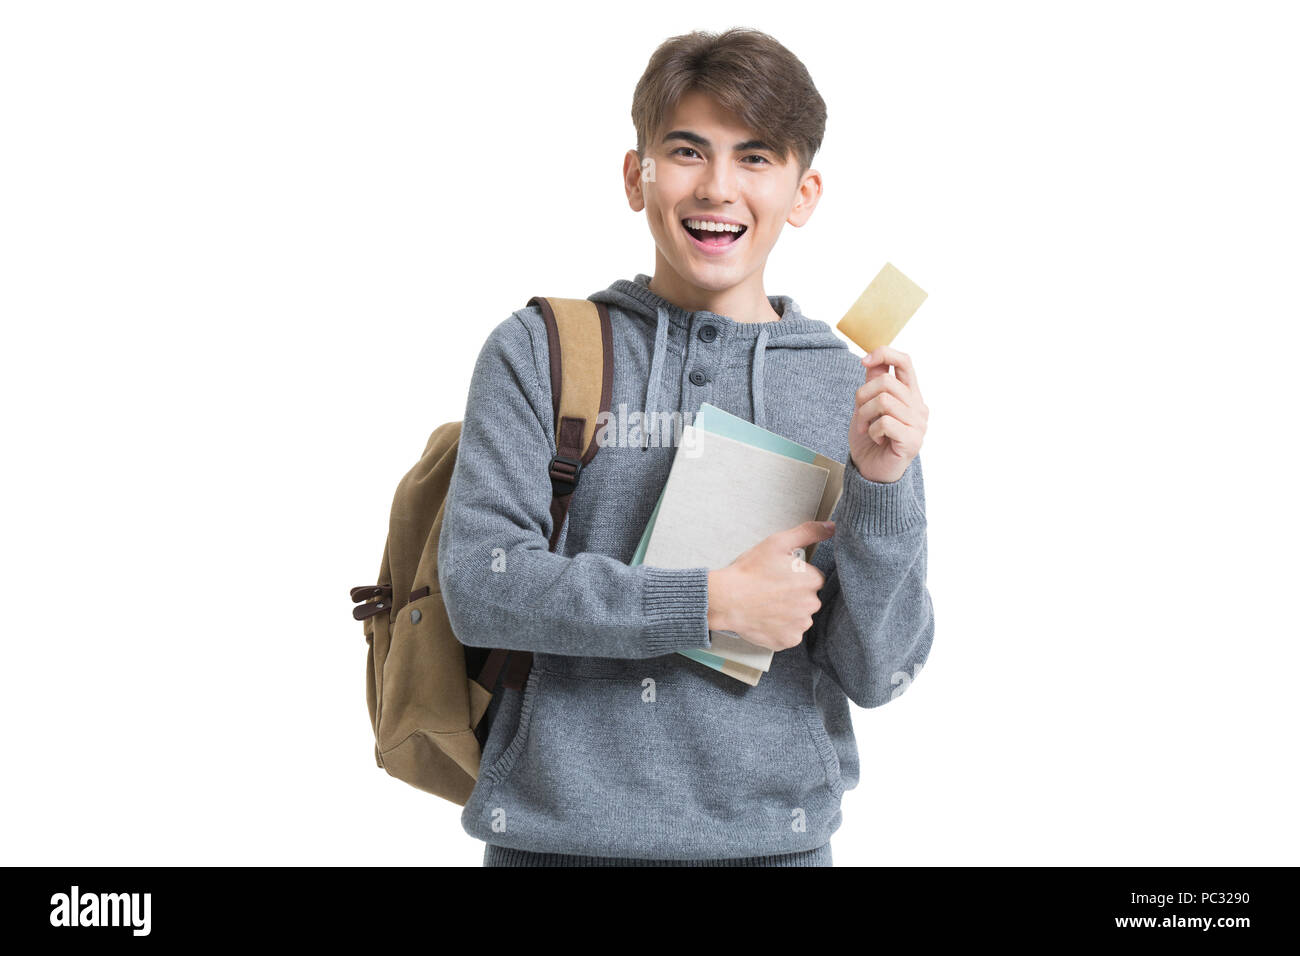 Cheerful male college student holding books and credit card Stock Photo